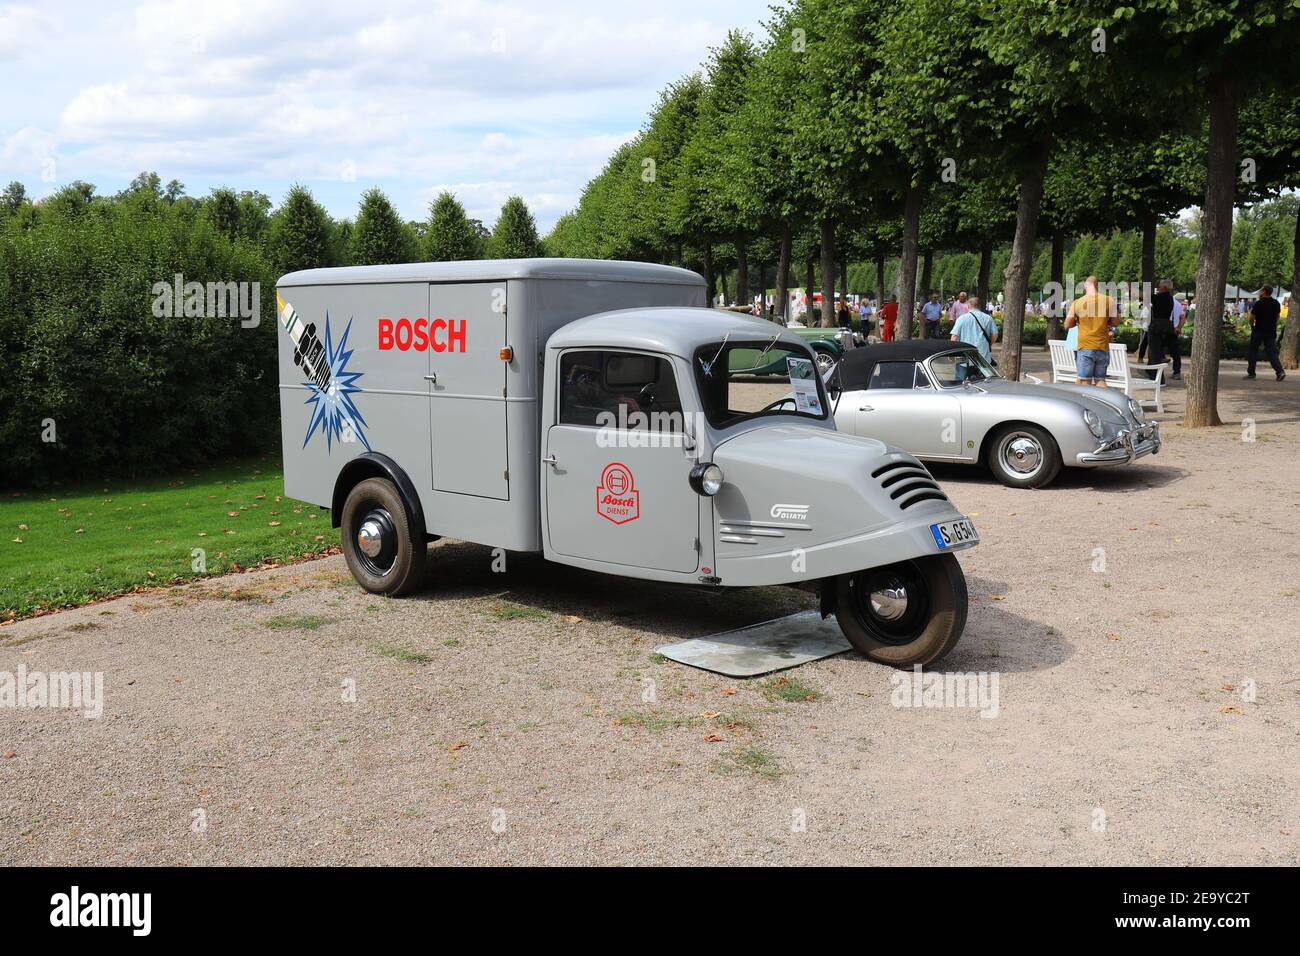 GERMANY, SCHWETZINGEN - SEPTEMBER 01, 2019: Goliath GD 750 panel van from  1954 with BOSCH printing exhibited at the 15. Internat. Concours d'Eleganc  Stock Photo - Alamy